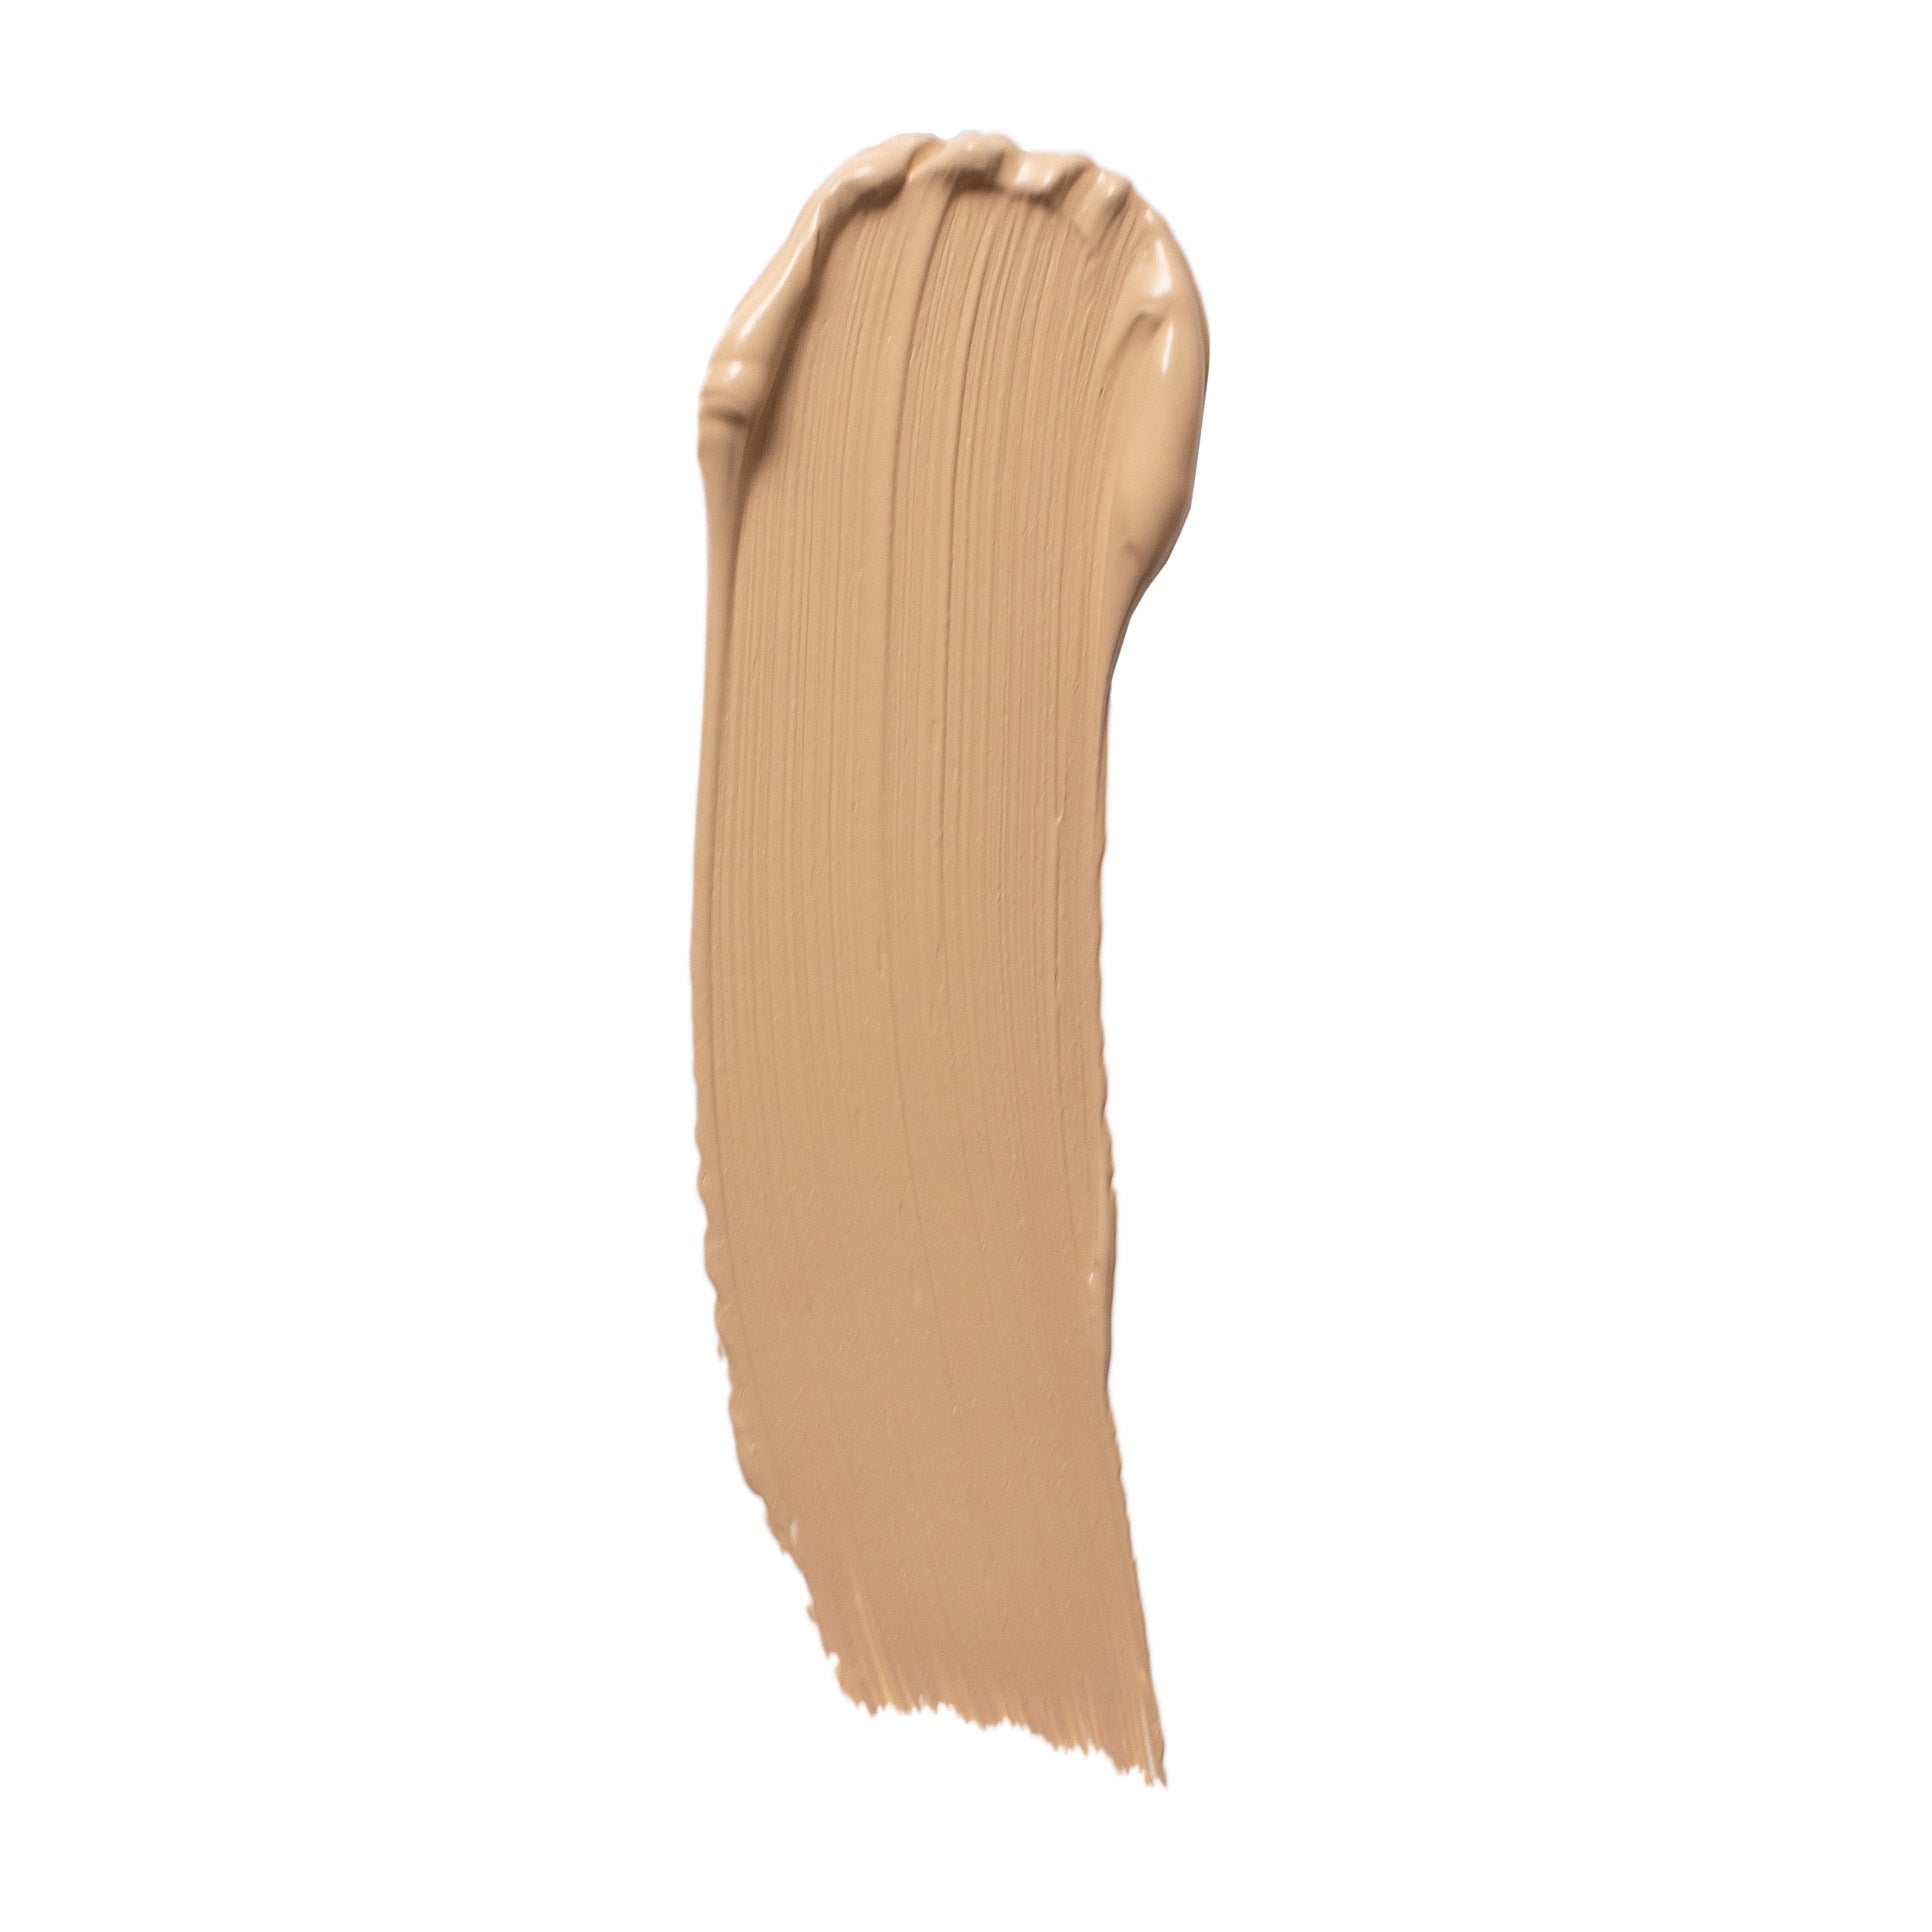 bPerfect CHROMA Cover Matte Foundation, W3 swatch